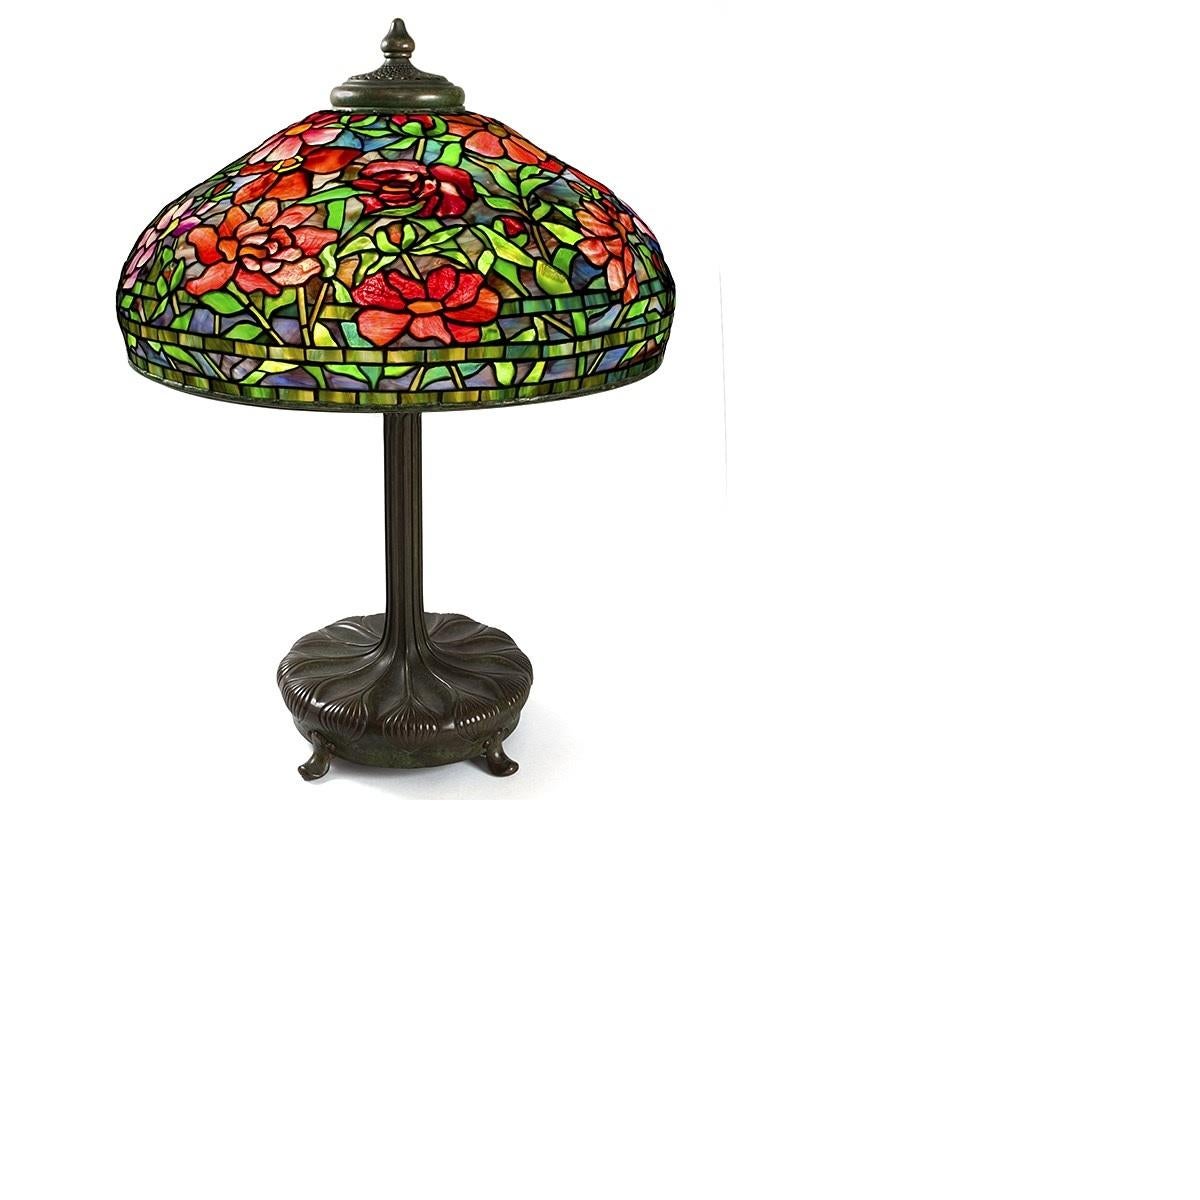 Tiffany Studios New York “Peony” leaded glass and patinated bronze table lamp. The domed shade features red, pink and purple peonies with mottled green leaves against a striated blue and lavender ground with extensive drapery glass used throughout